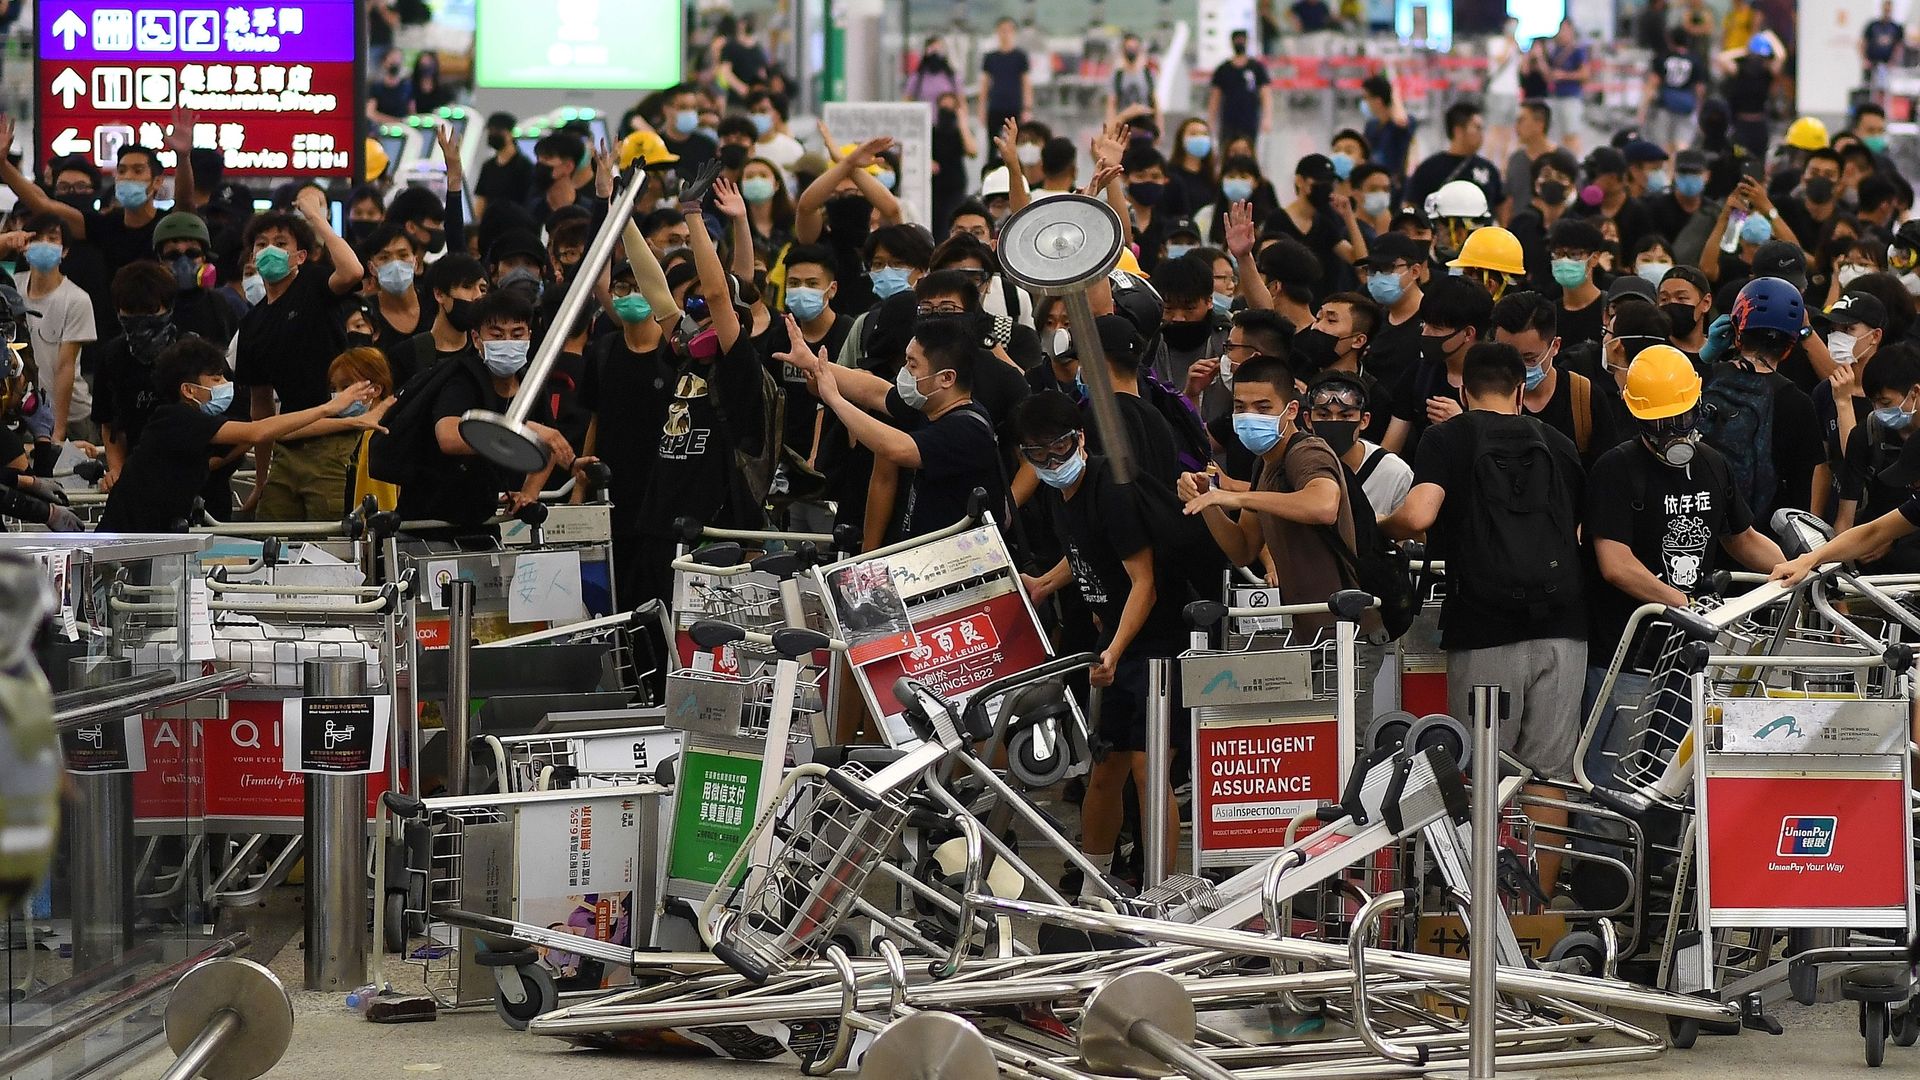 protestors create a barricade of luggage carts at the airport